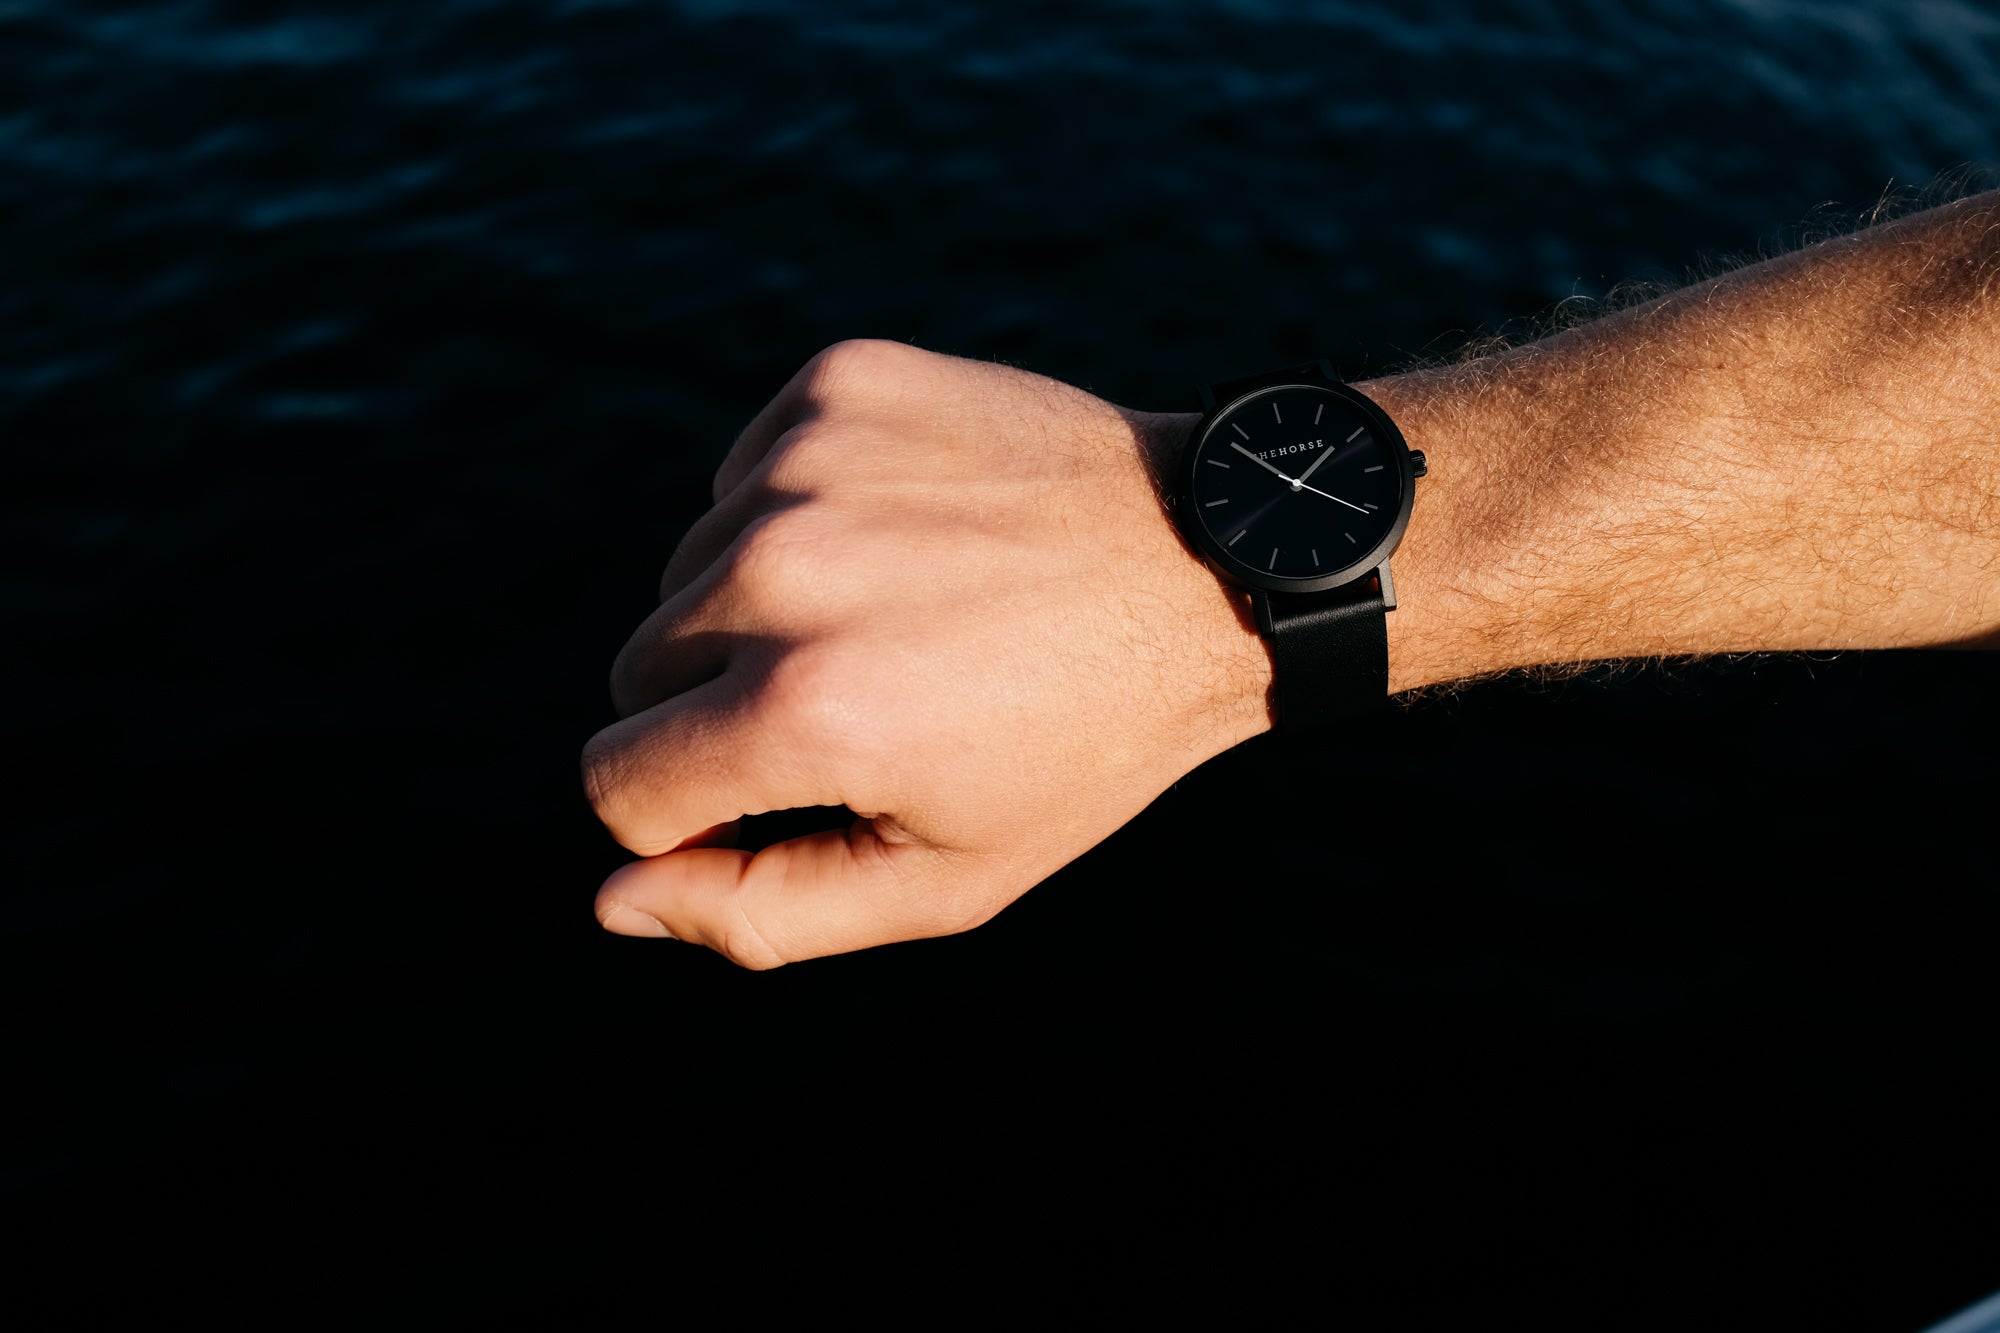 The Original Watch Matte Black / Black Sunray / Black Leather Strap by The Horse